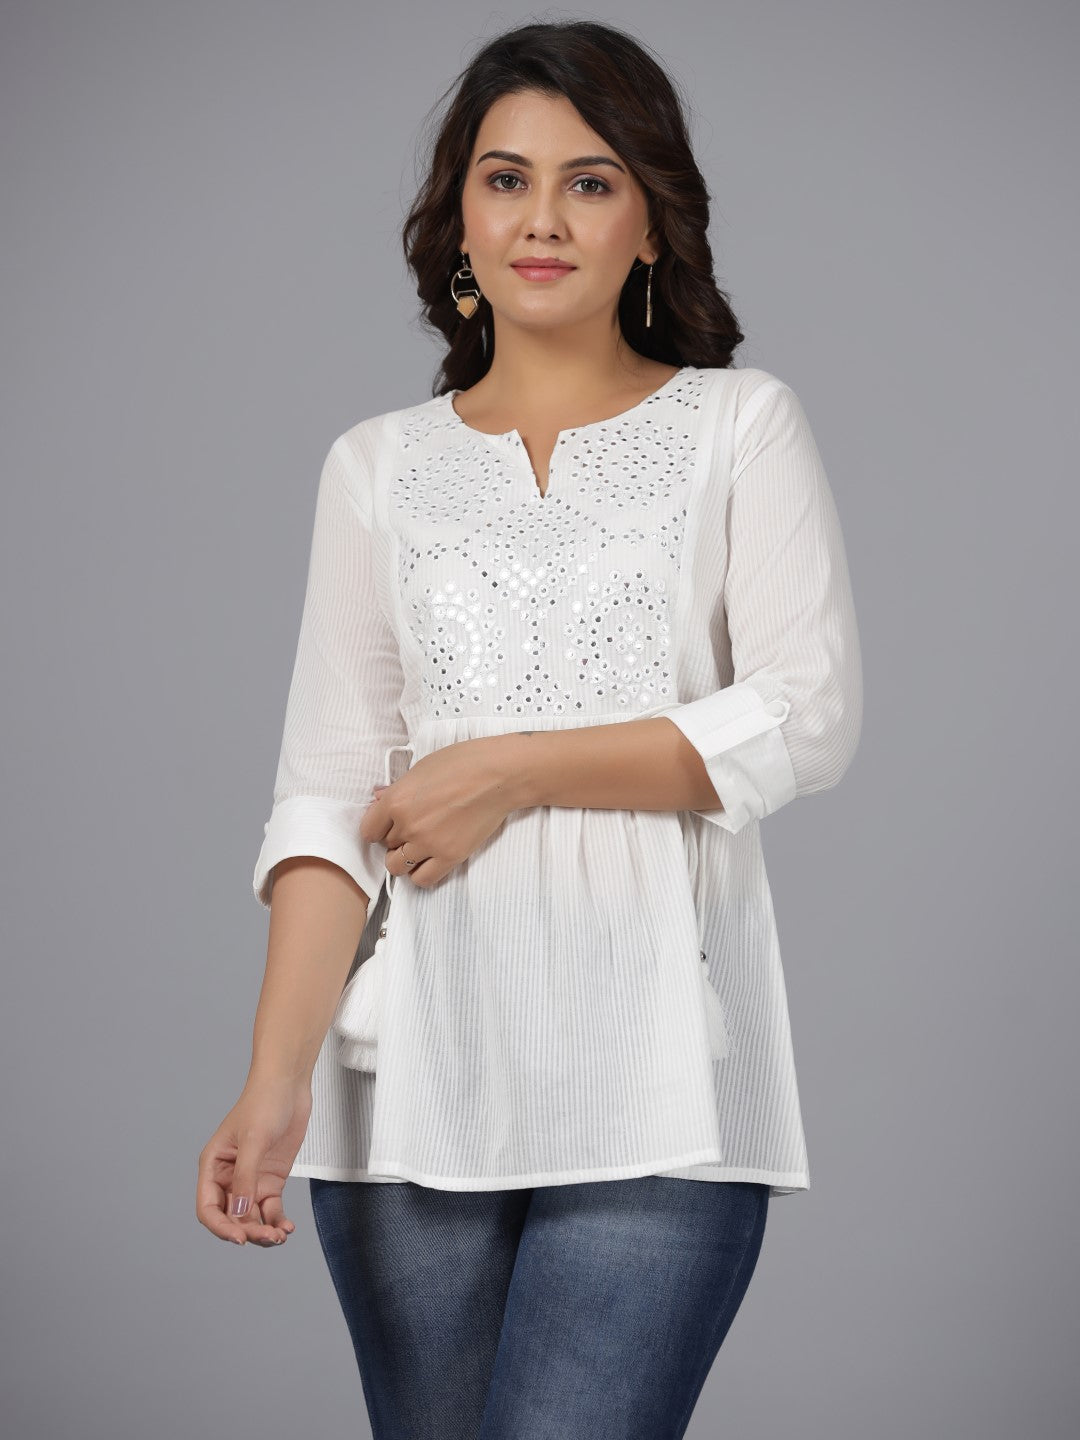 Juniper White Geometric Cotton Dobby Tunic With Mirror Work Embroidery.